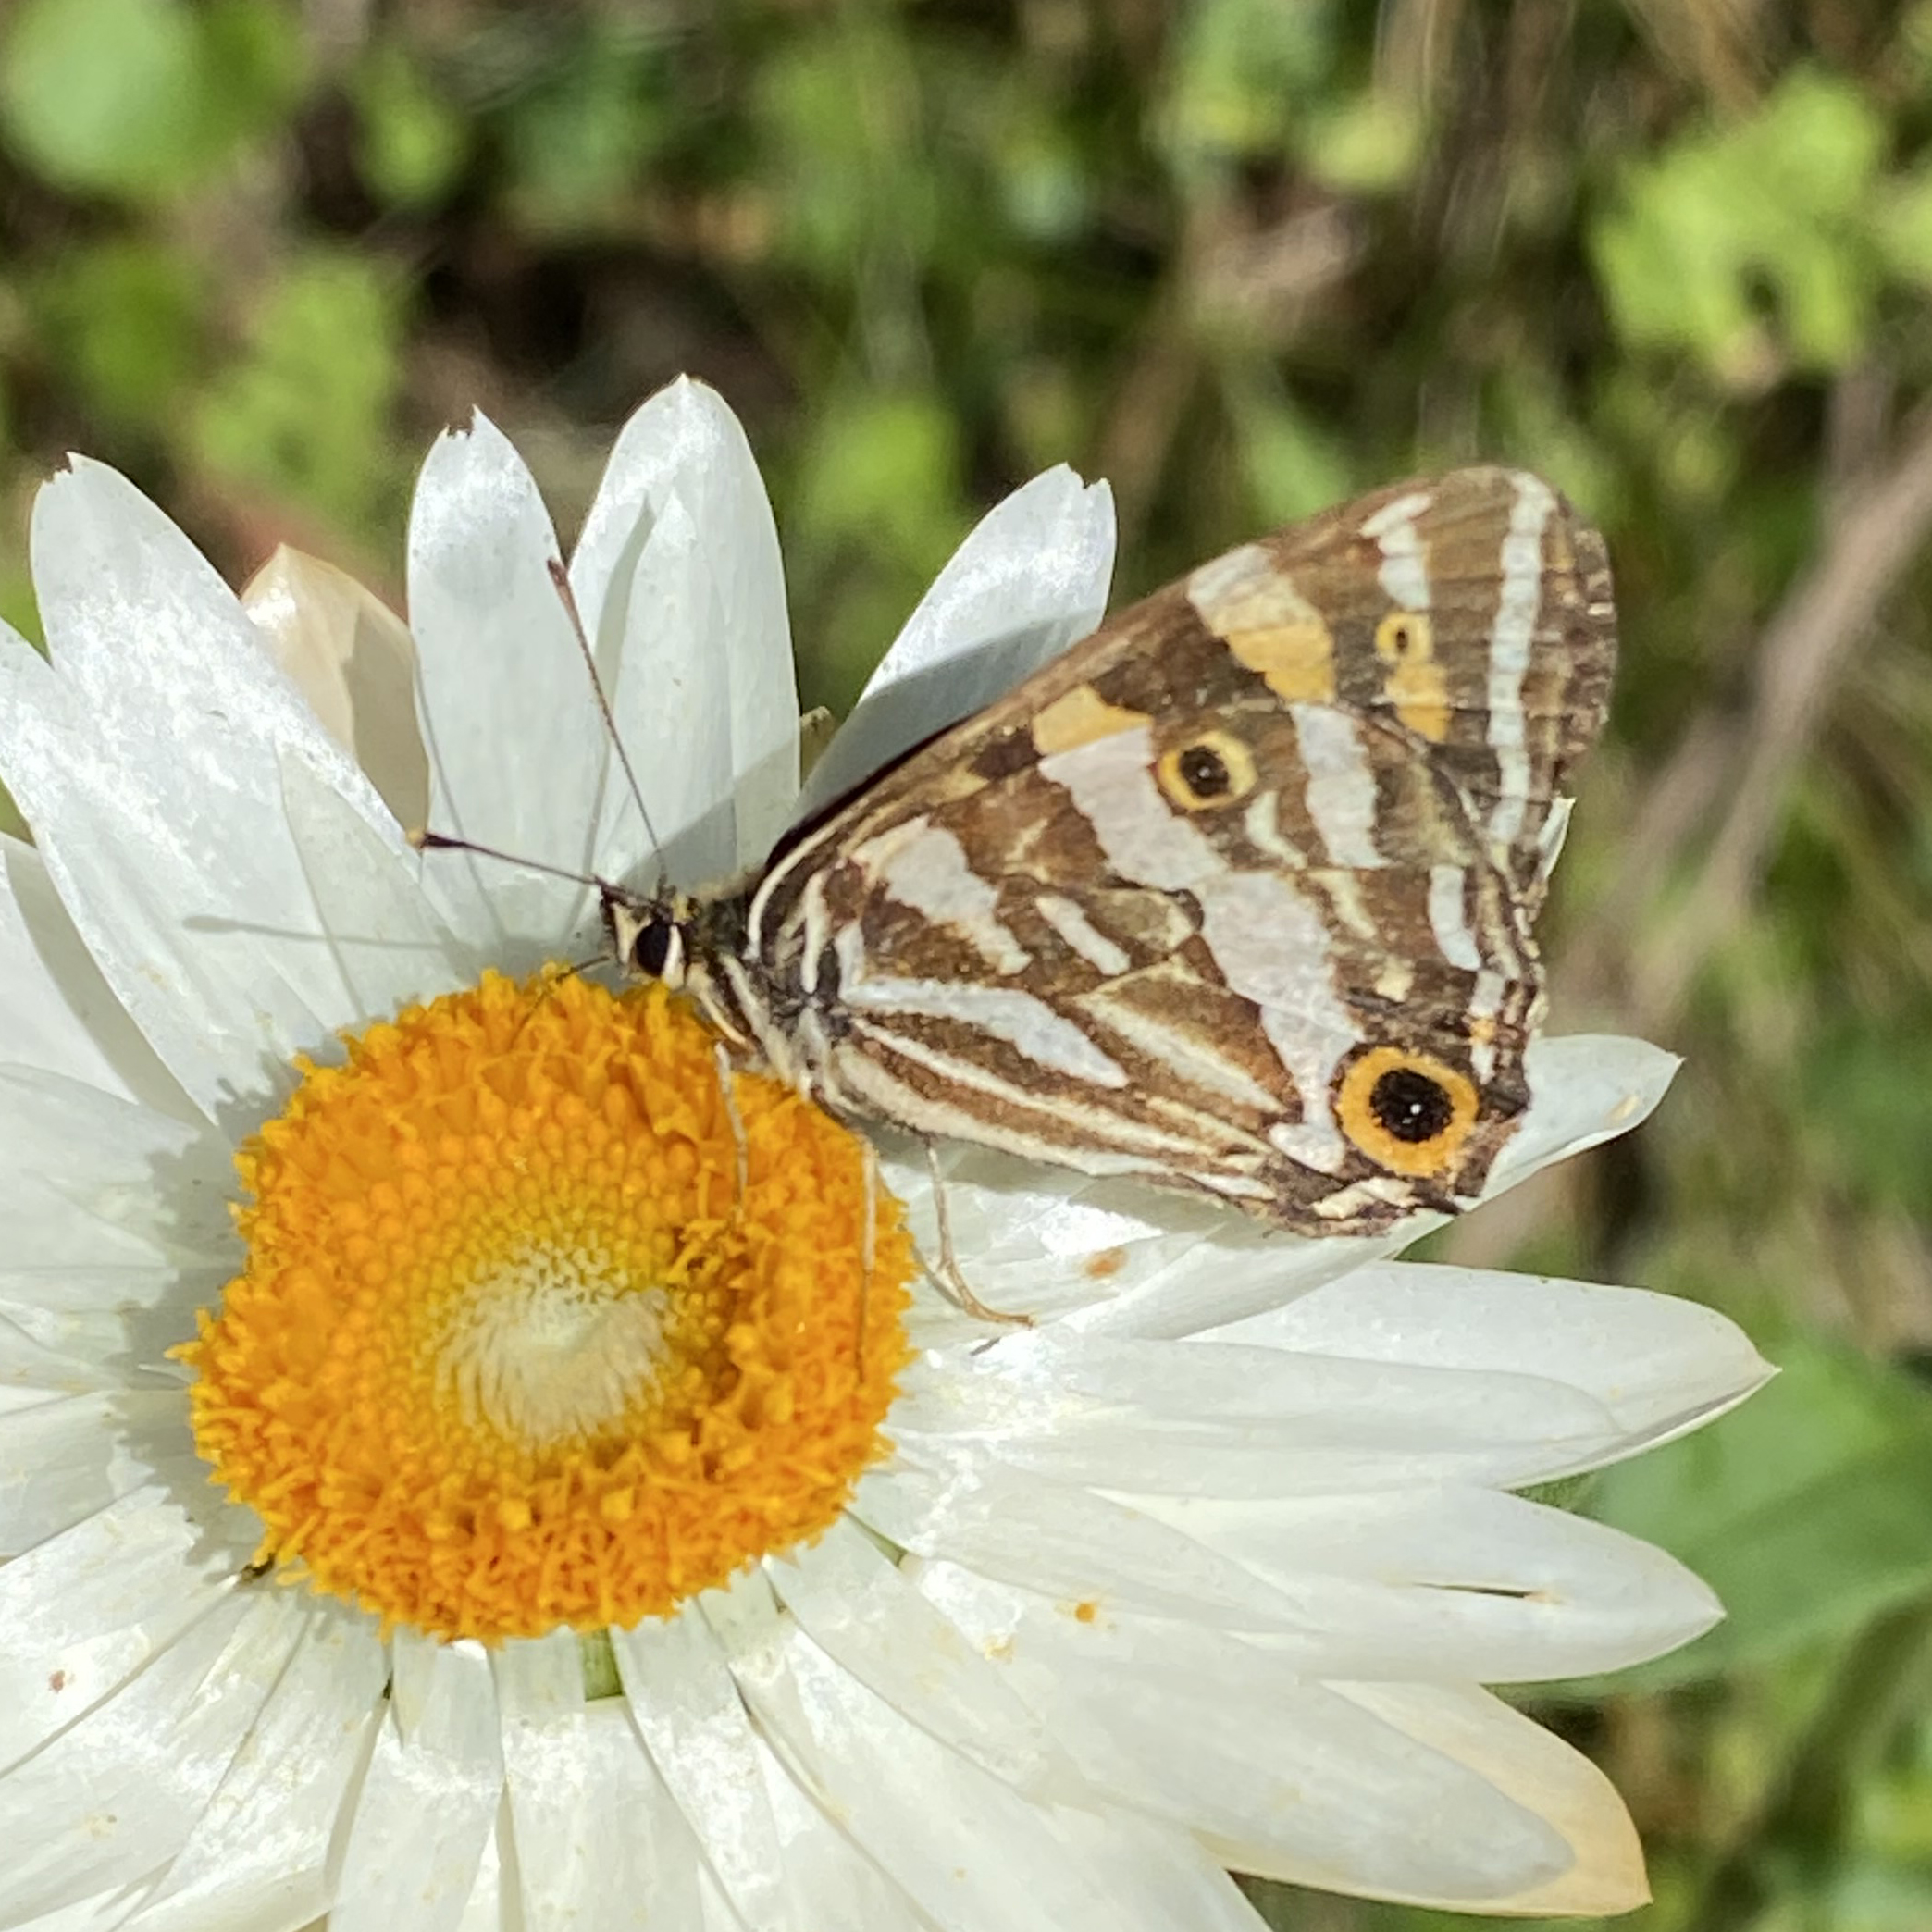 Photo of a butterfly on a flower